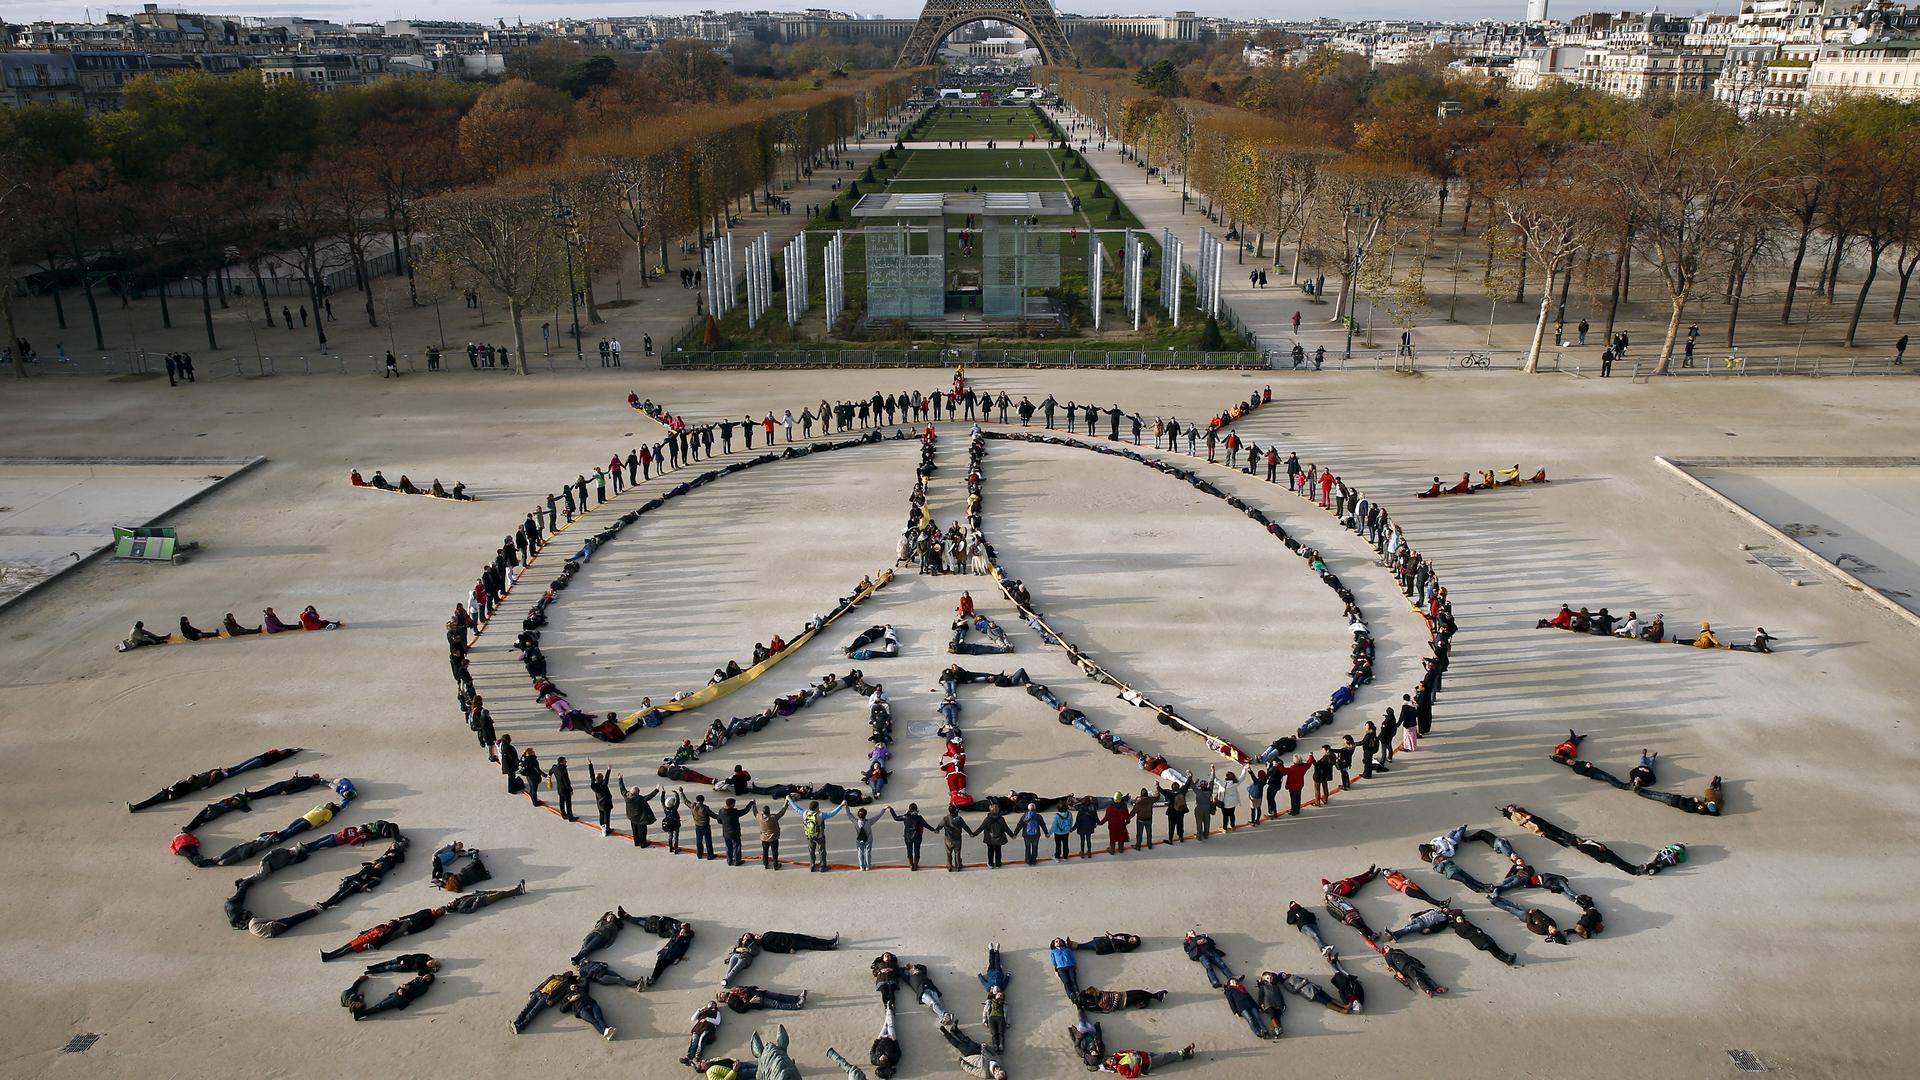 Hundreds of environmentalists arrange their bodies to form a message in front of the Eiffel Tower in Paris, France, December 6, 2015, as the World Climate Change Conference 2015 (COP21) continues at Le Bourget near the French capital.